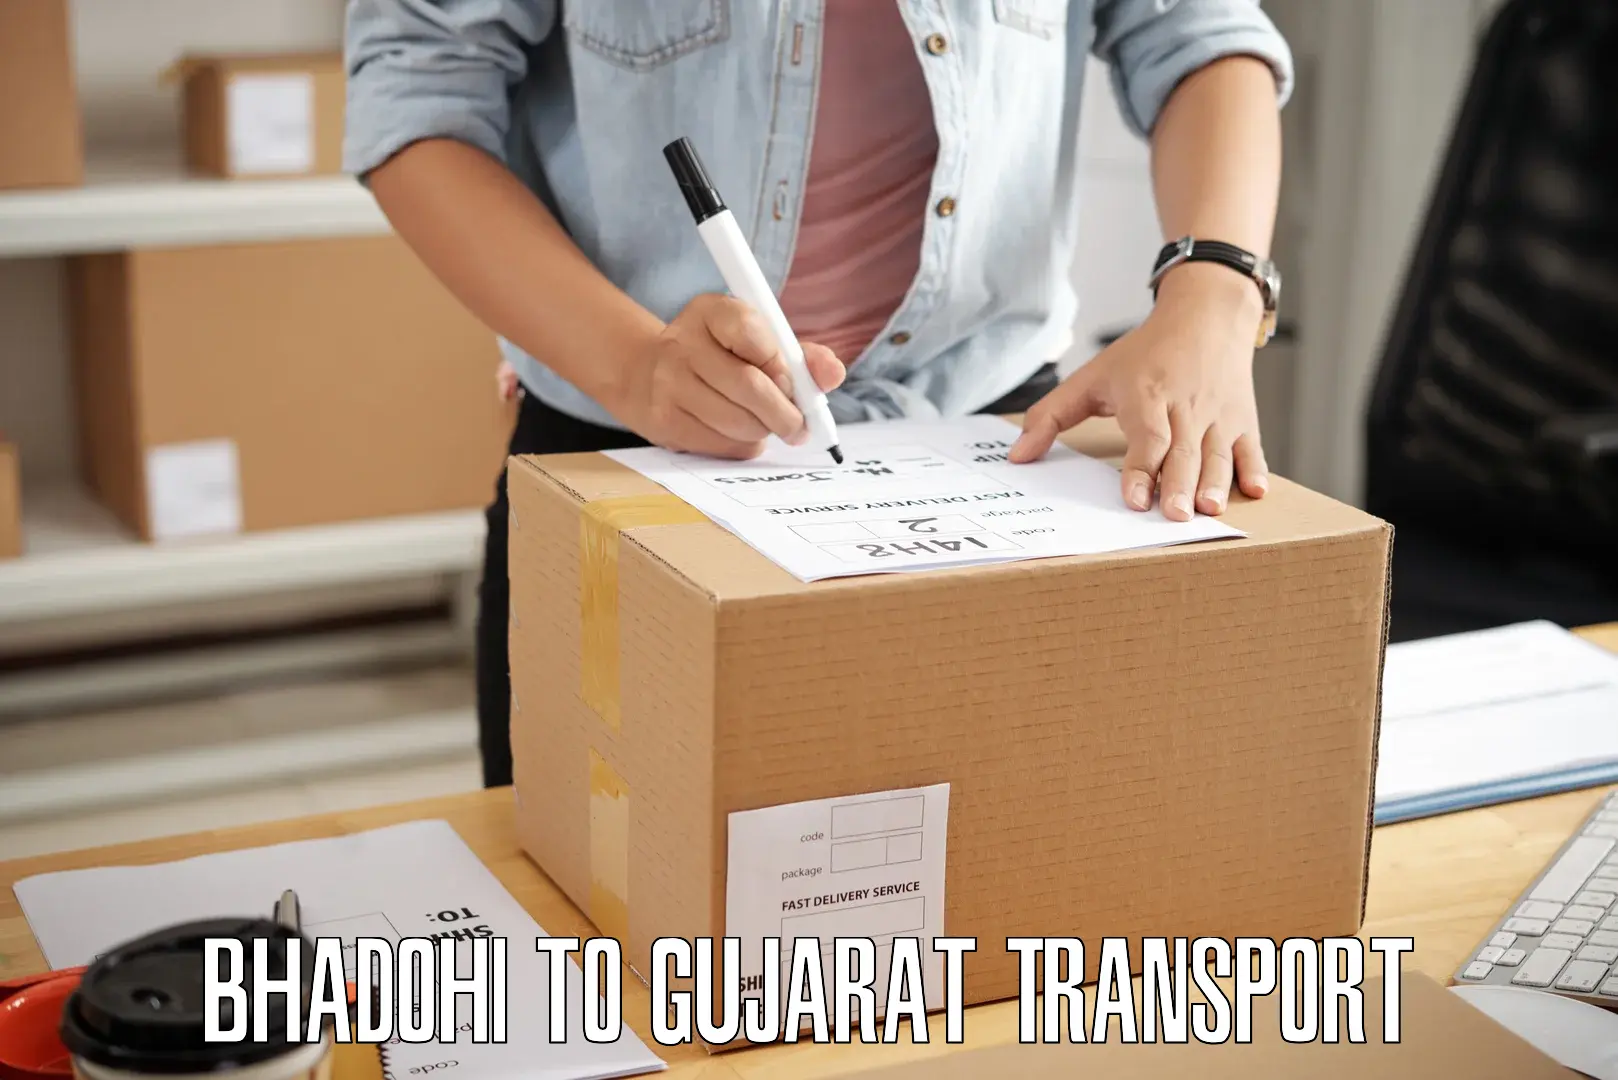 Daily transport service Bhadohi to Gujarat